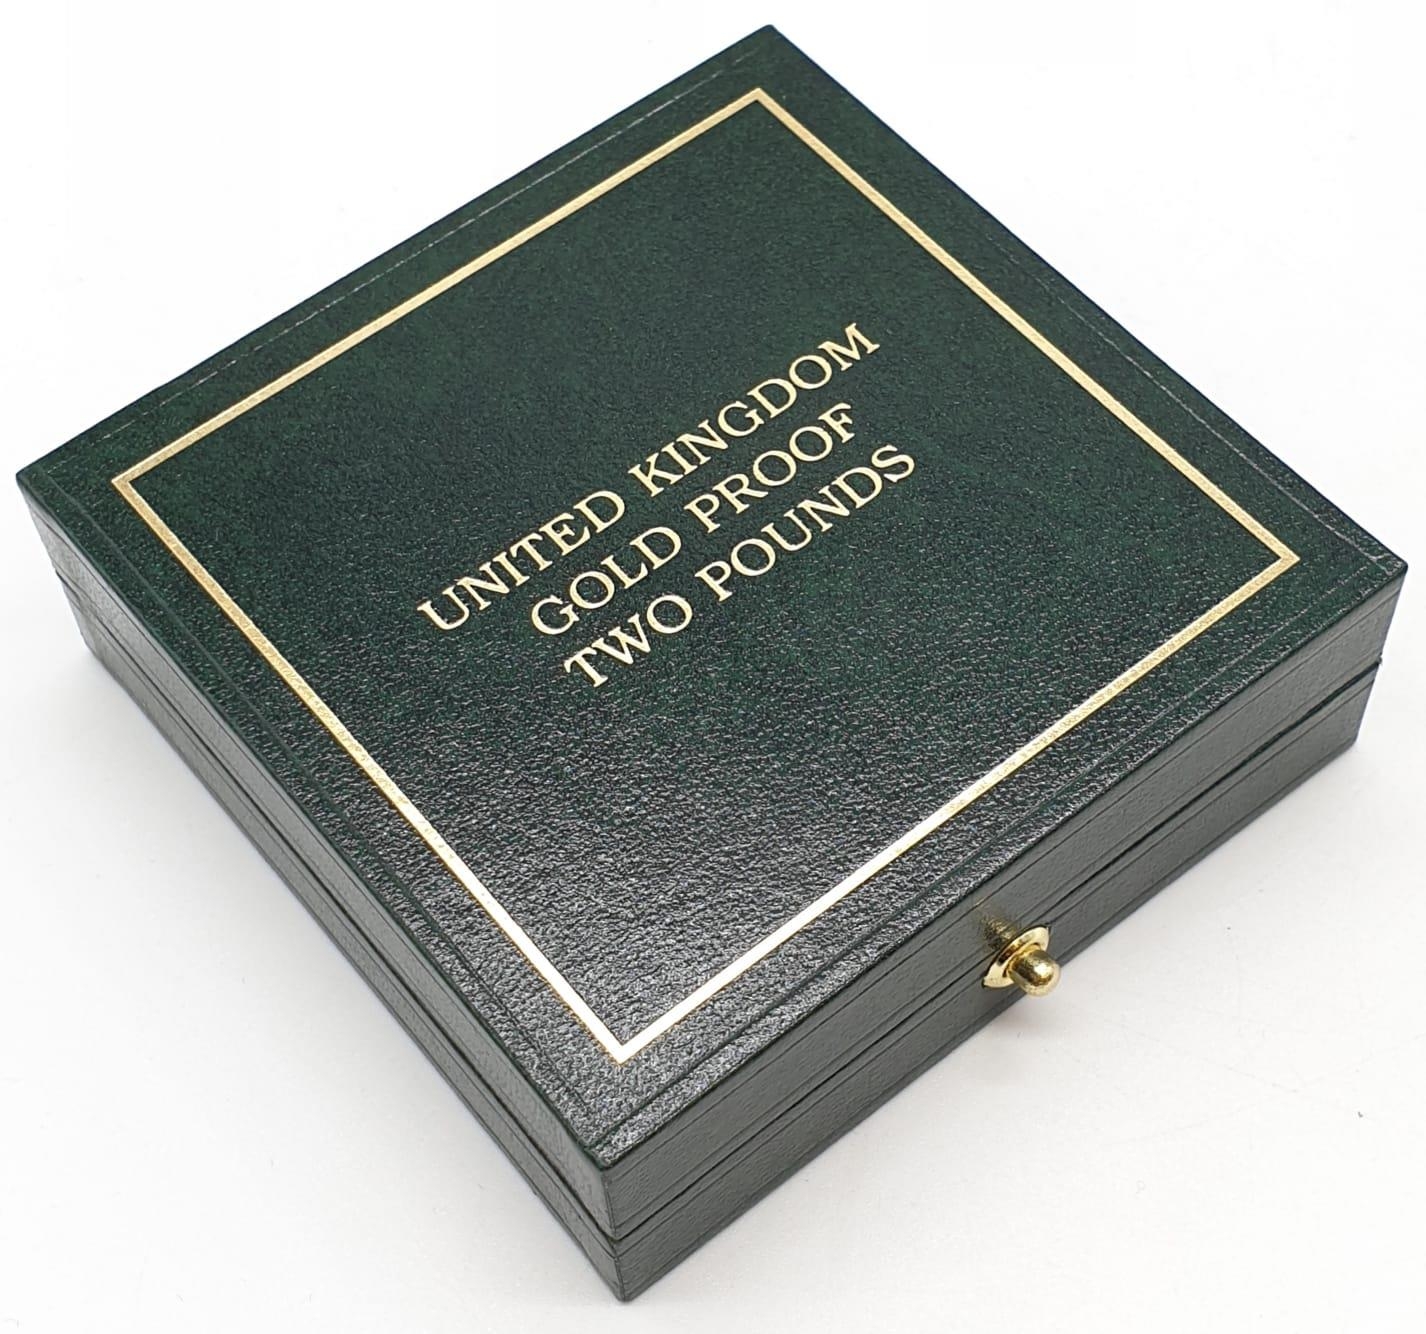 1995 UK GOLD PROOF £2 COIN, 22ct GOLD WEIGHT 15.98g, IN ORIGINAL BOX AND PAPER - Image 5 of 5